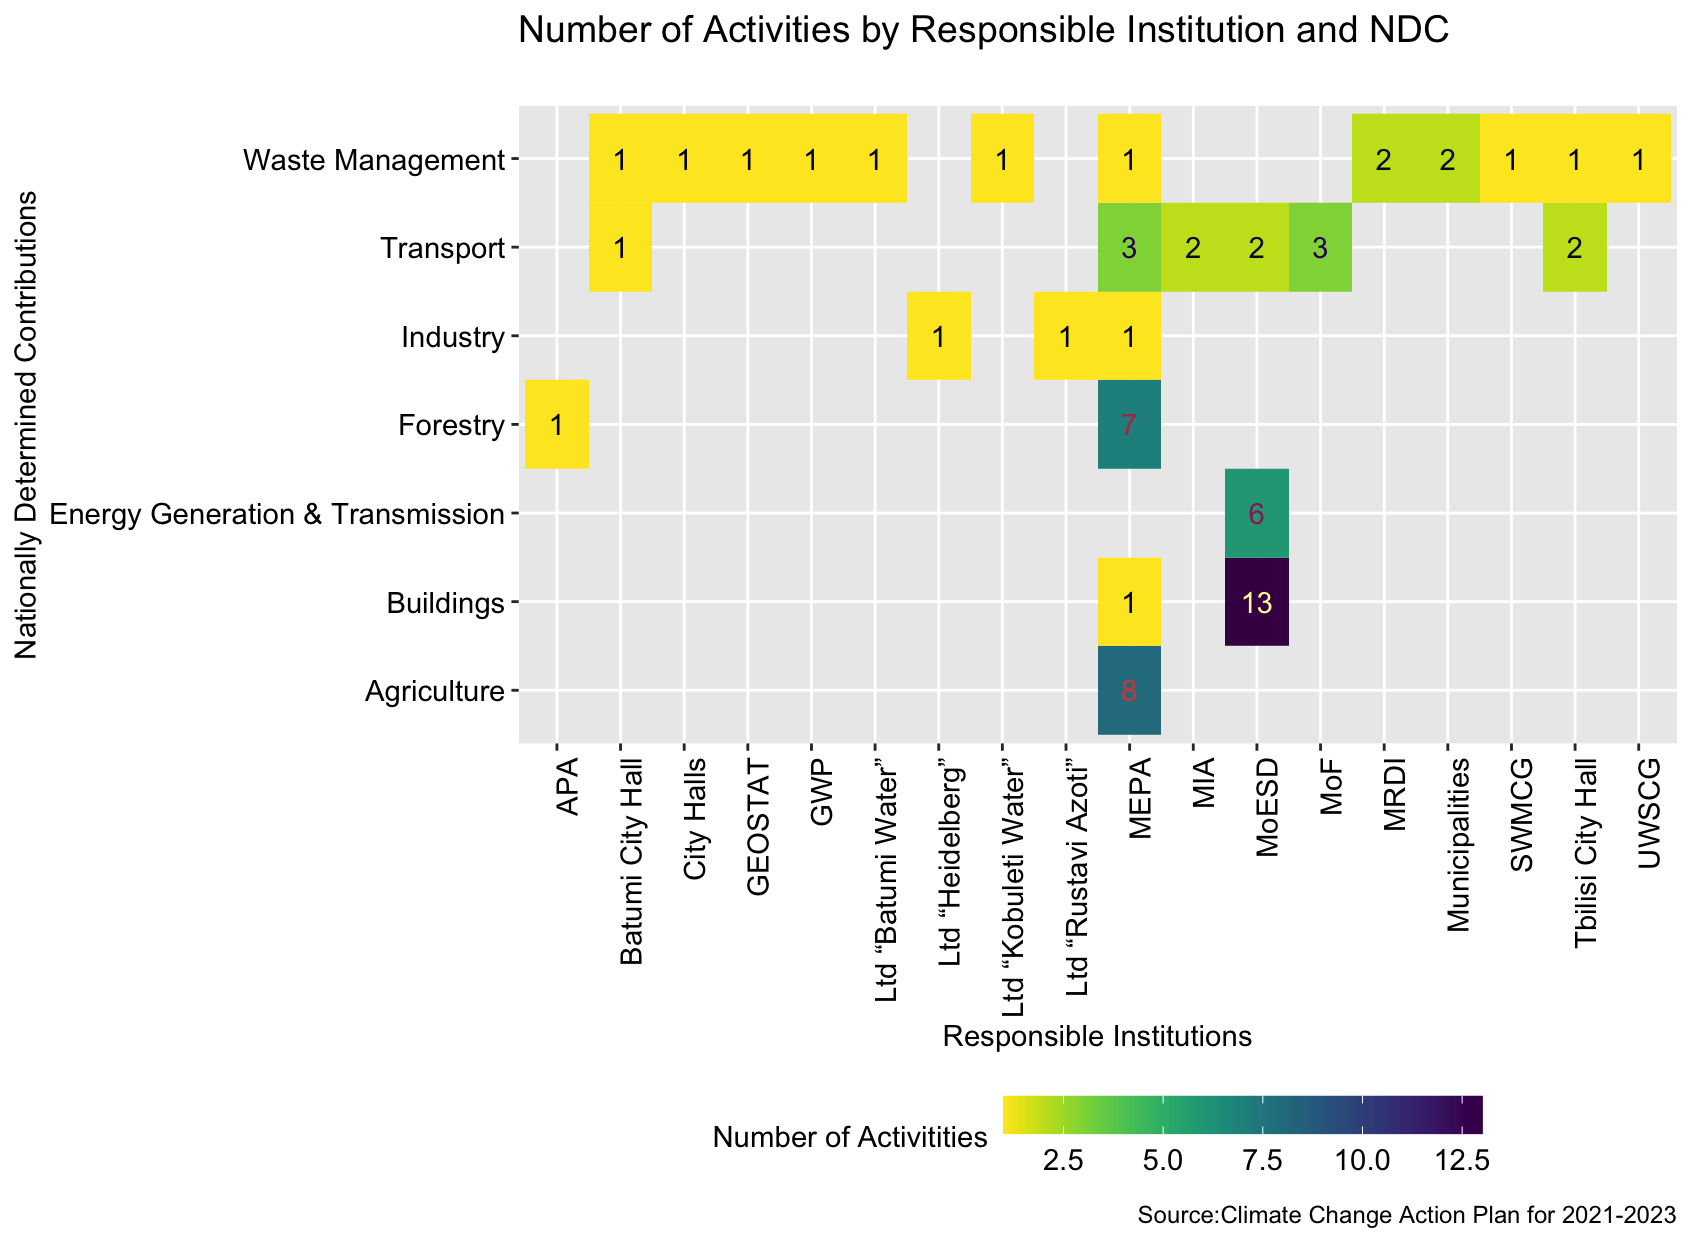 Number of activities by responsible institutions and NDC